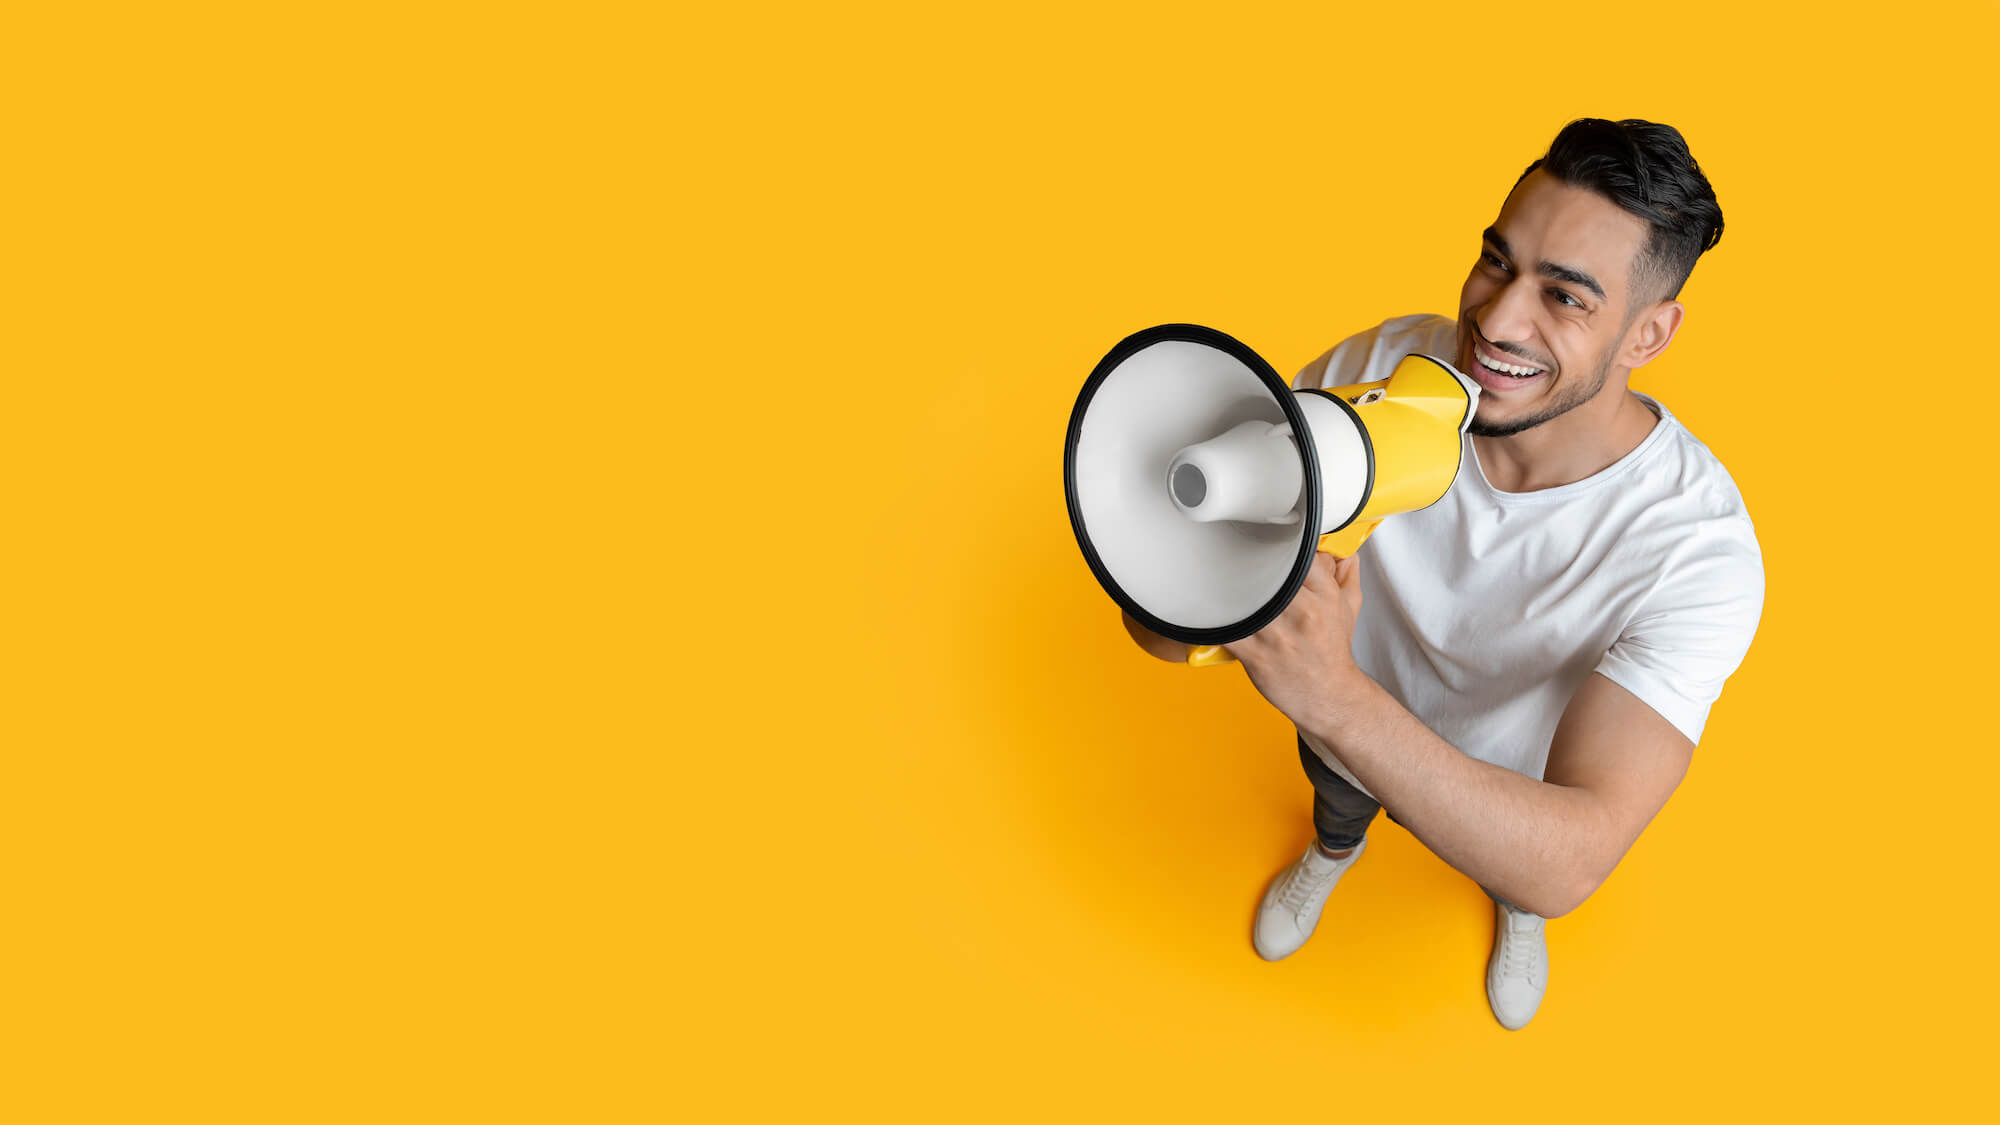 Smiling man holding a megaphone set against a yellow background